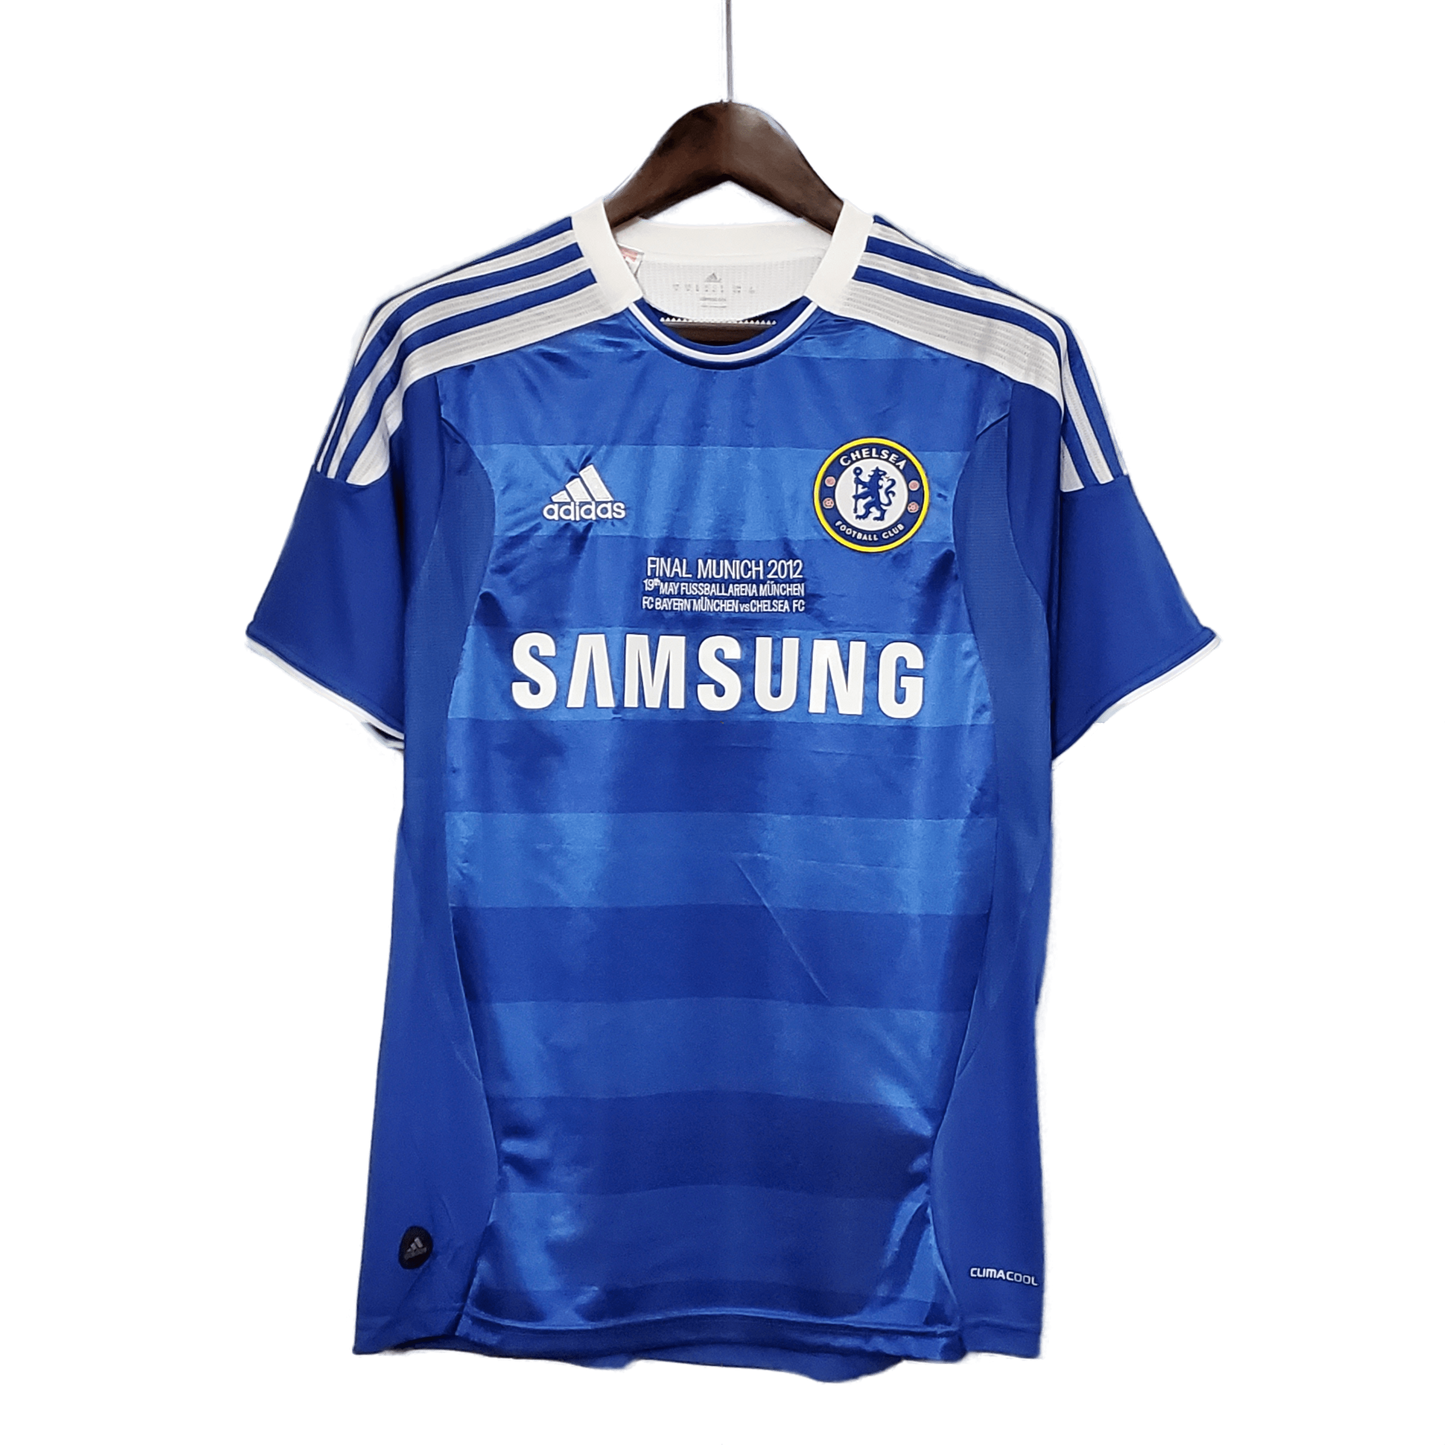 Retro Chelsea 2012/13 UCL Final Jersey